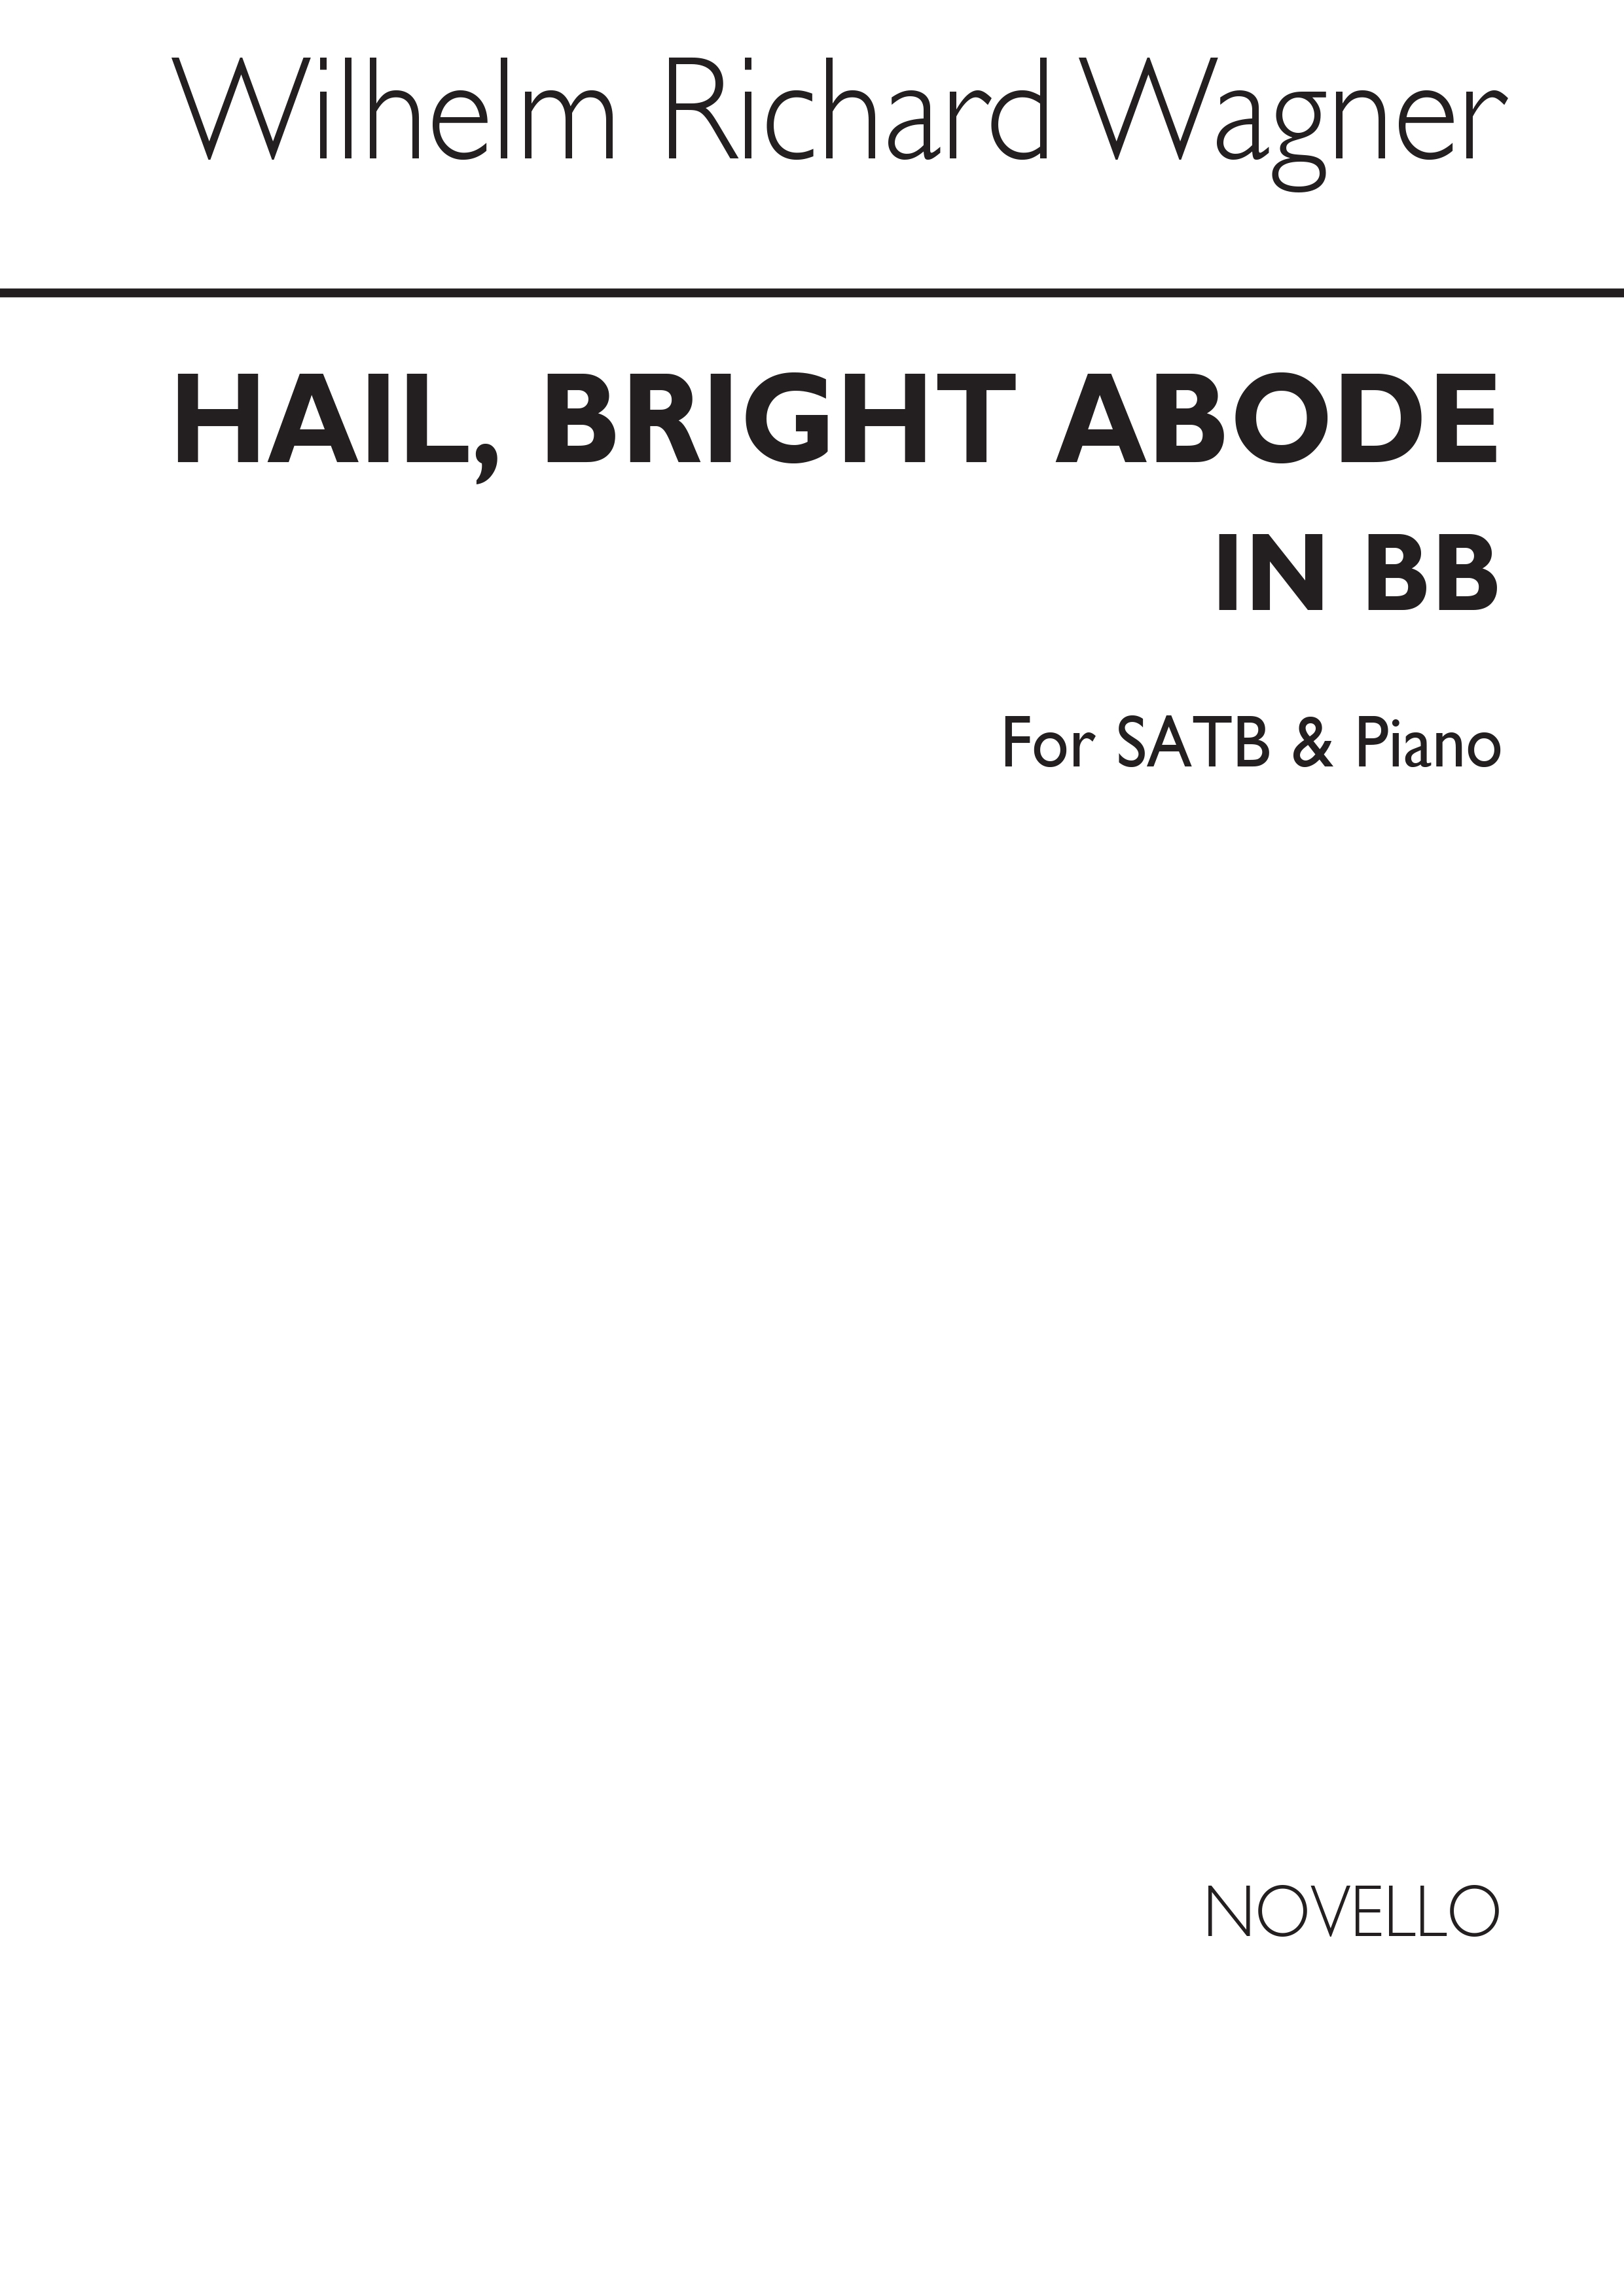 Wagner Hail Bright Abode In B Satb/Pf